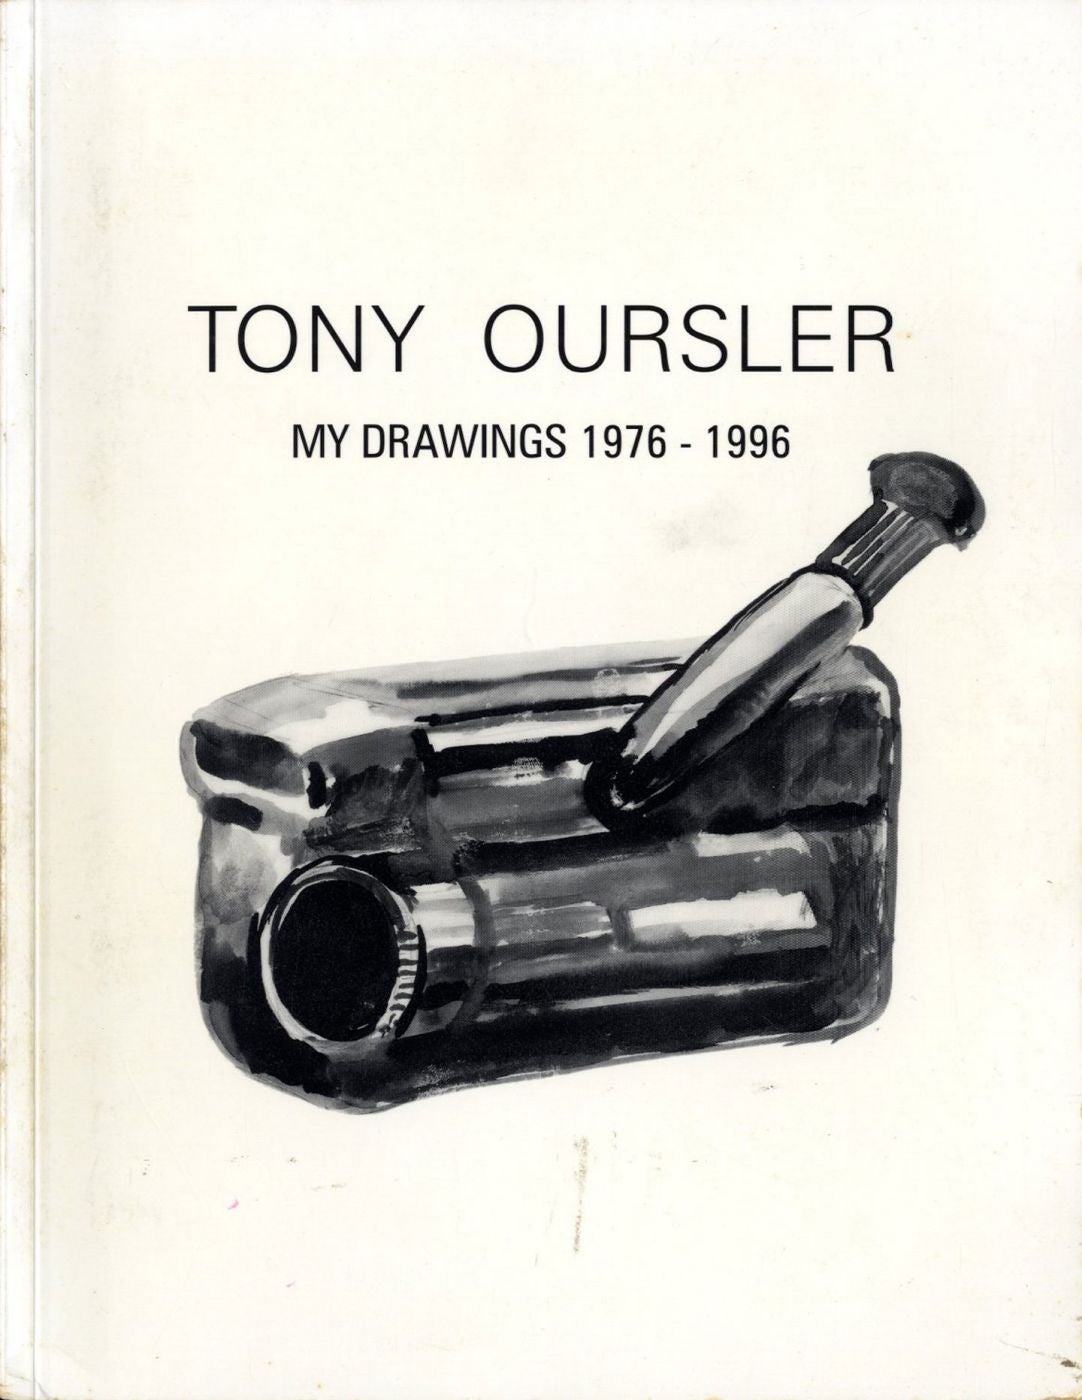 Tony Oursler: My Drawings 1976-1996